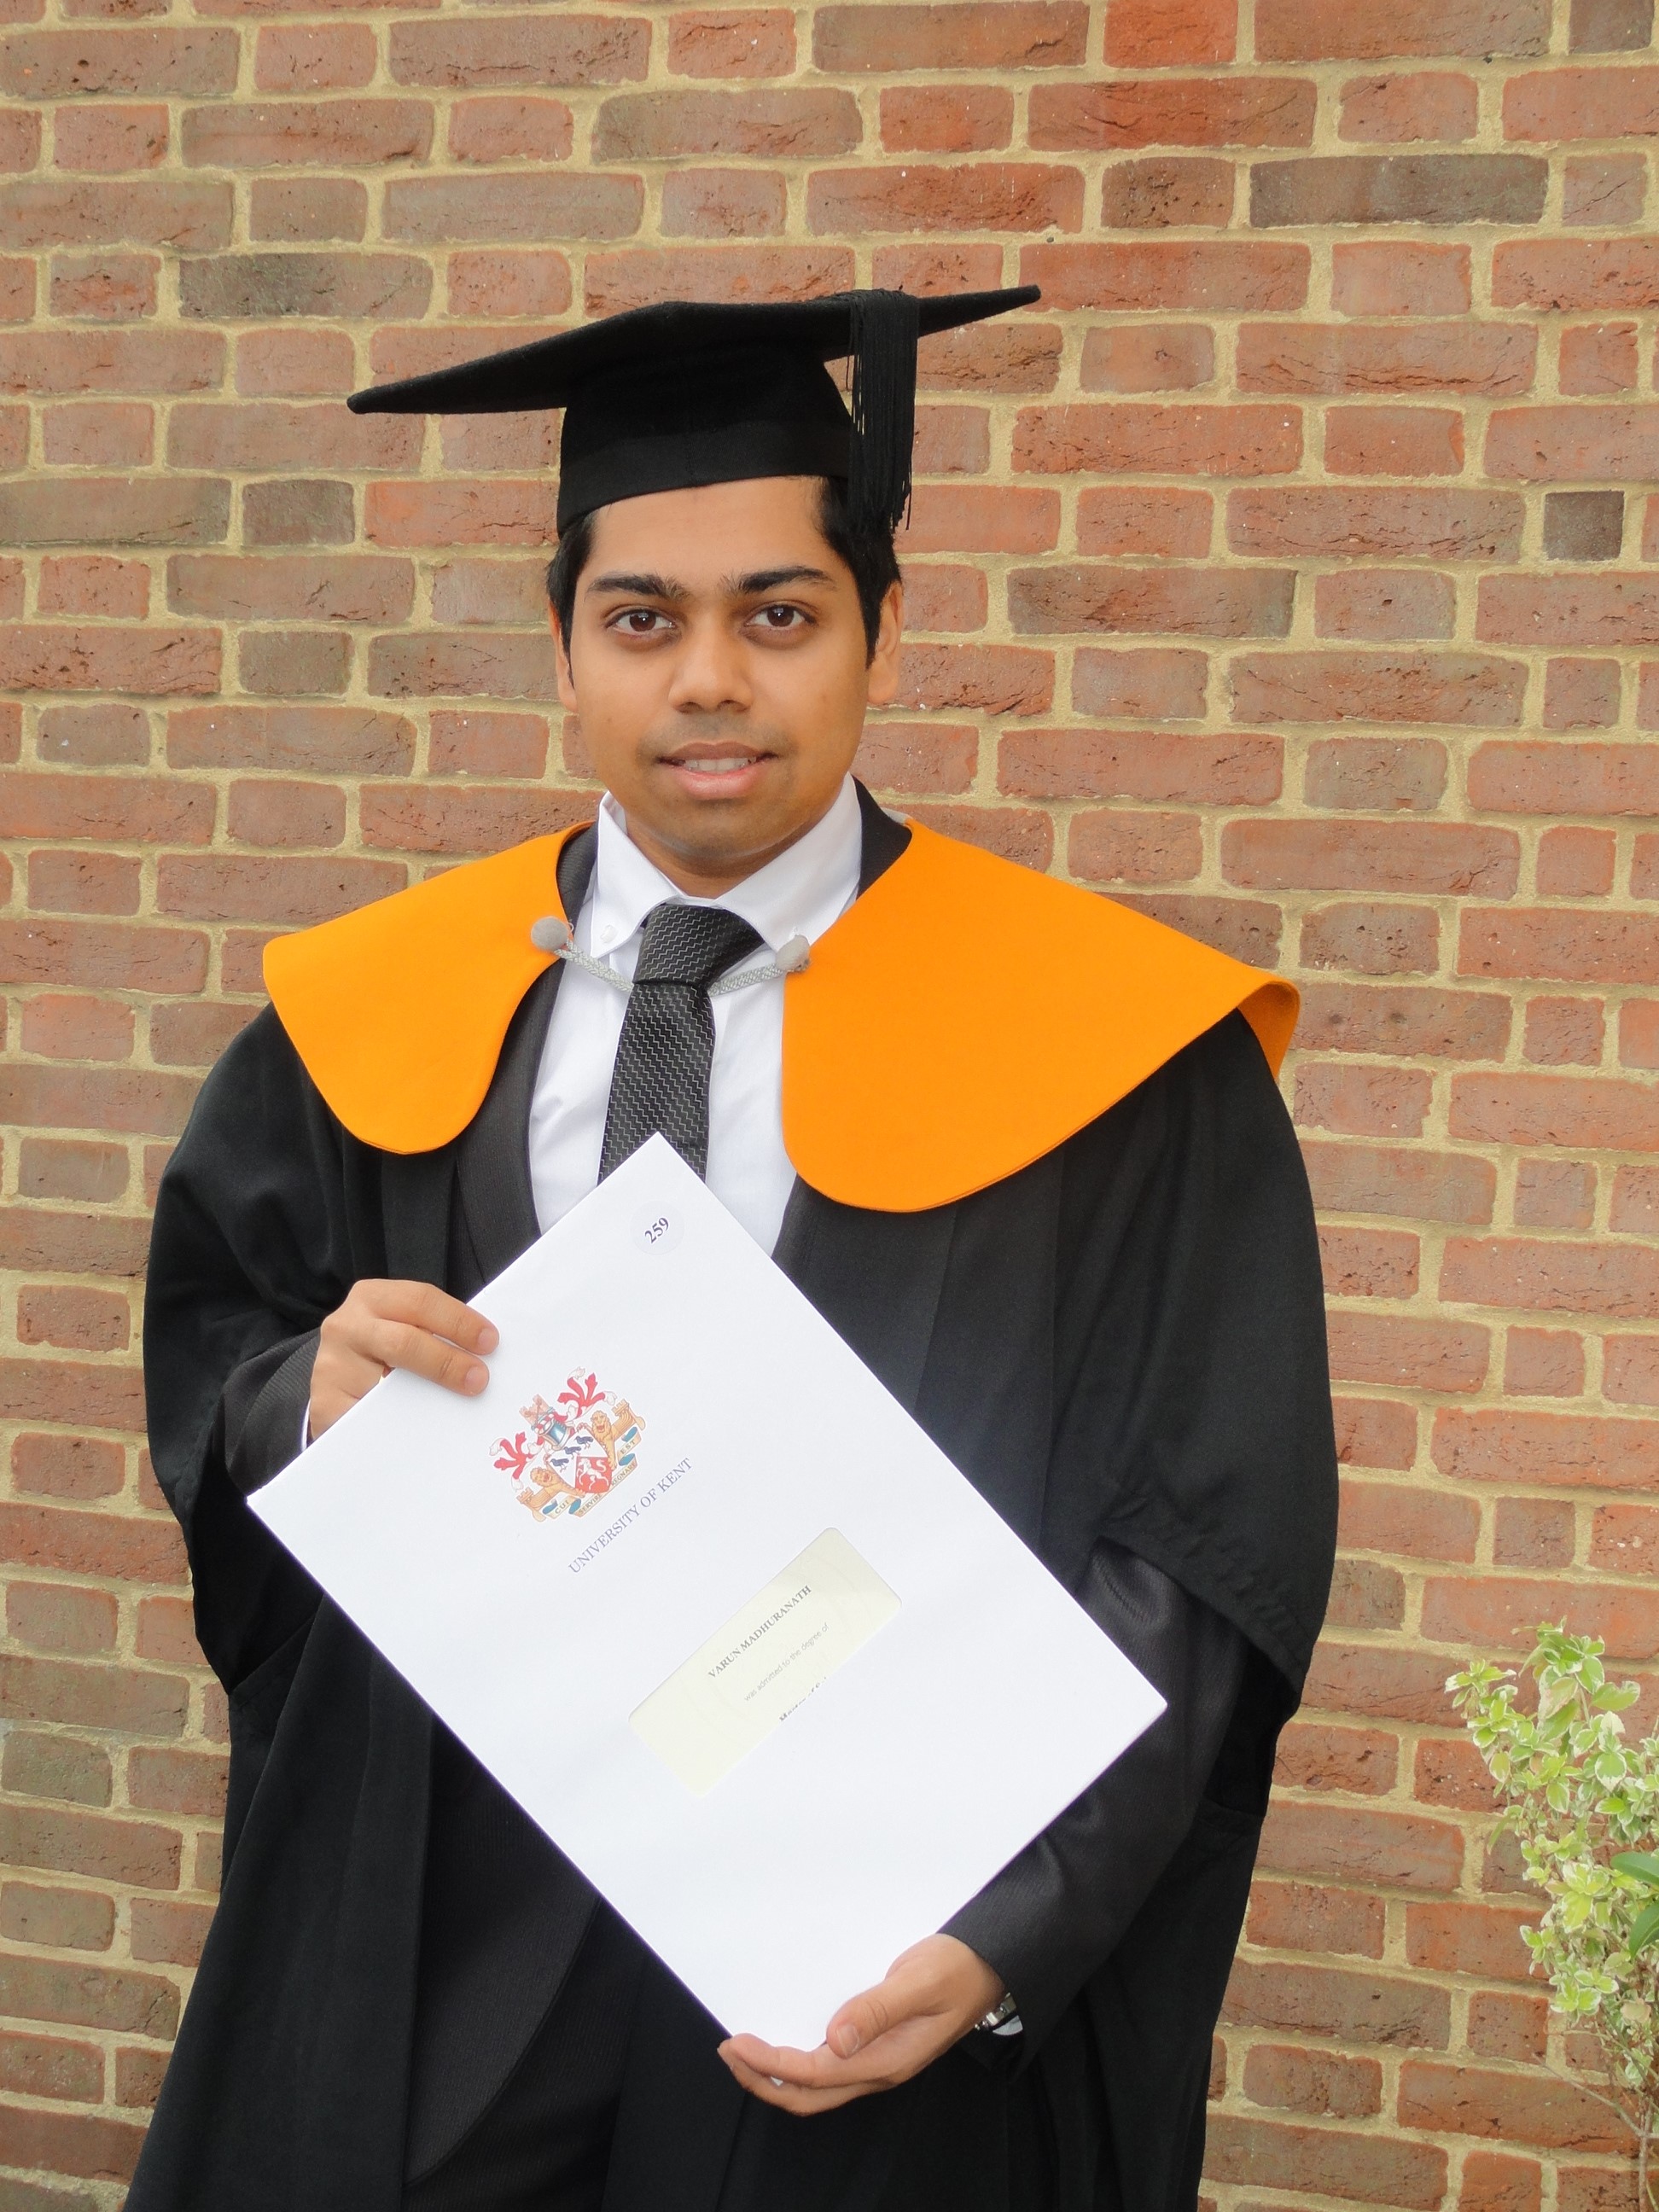 Varun holding his graduation degree certificate in his gown